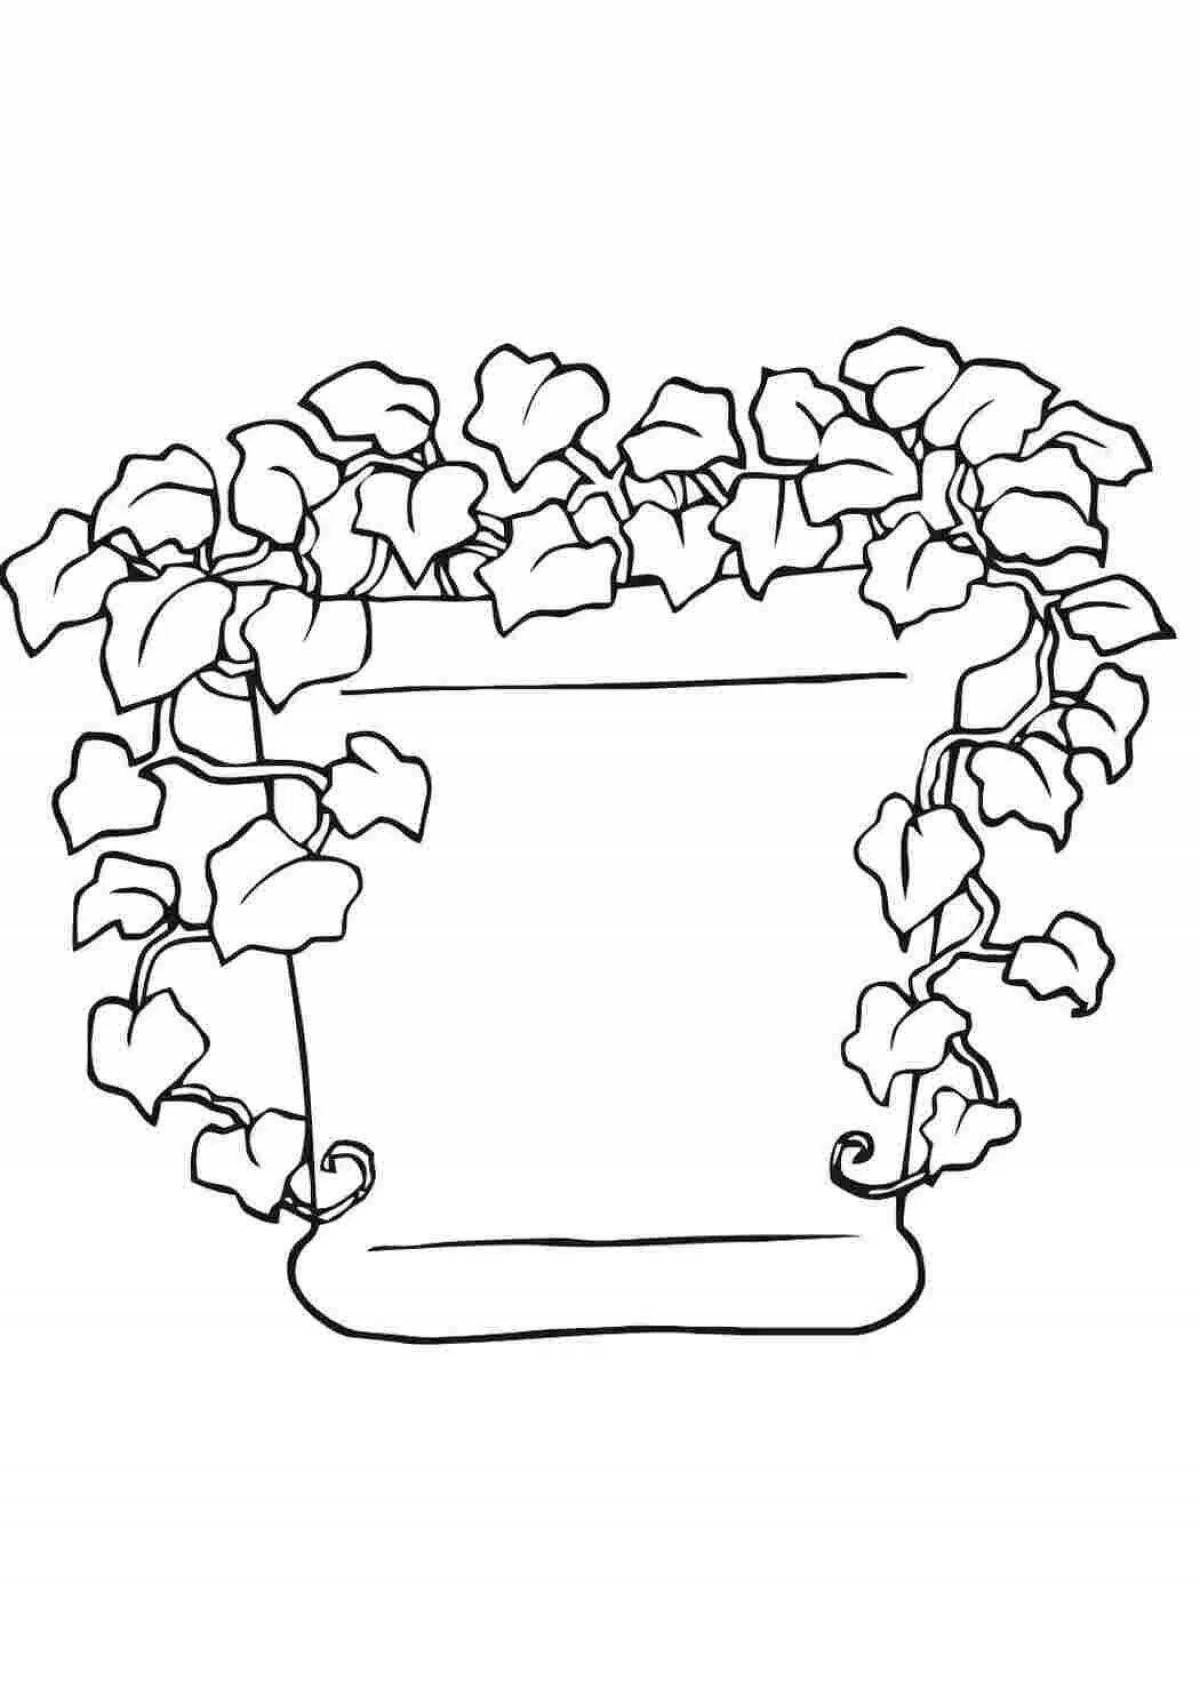 Playful houseplant coloring page for kids